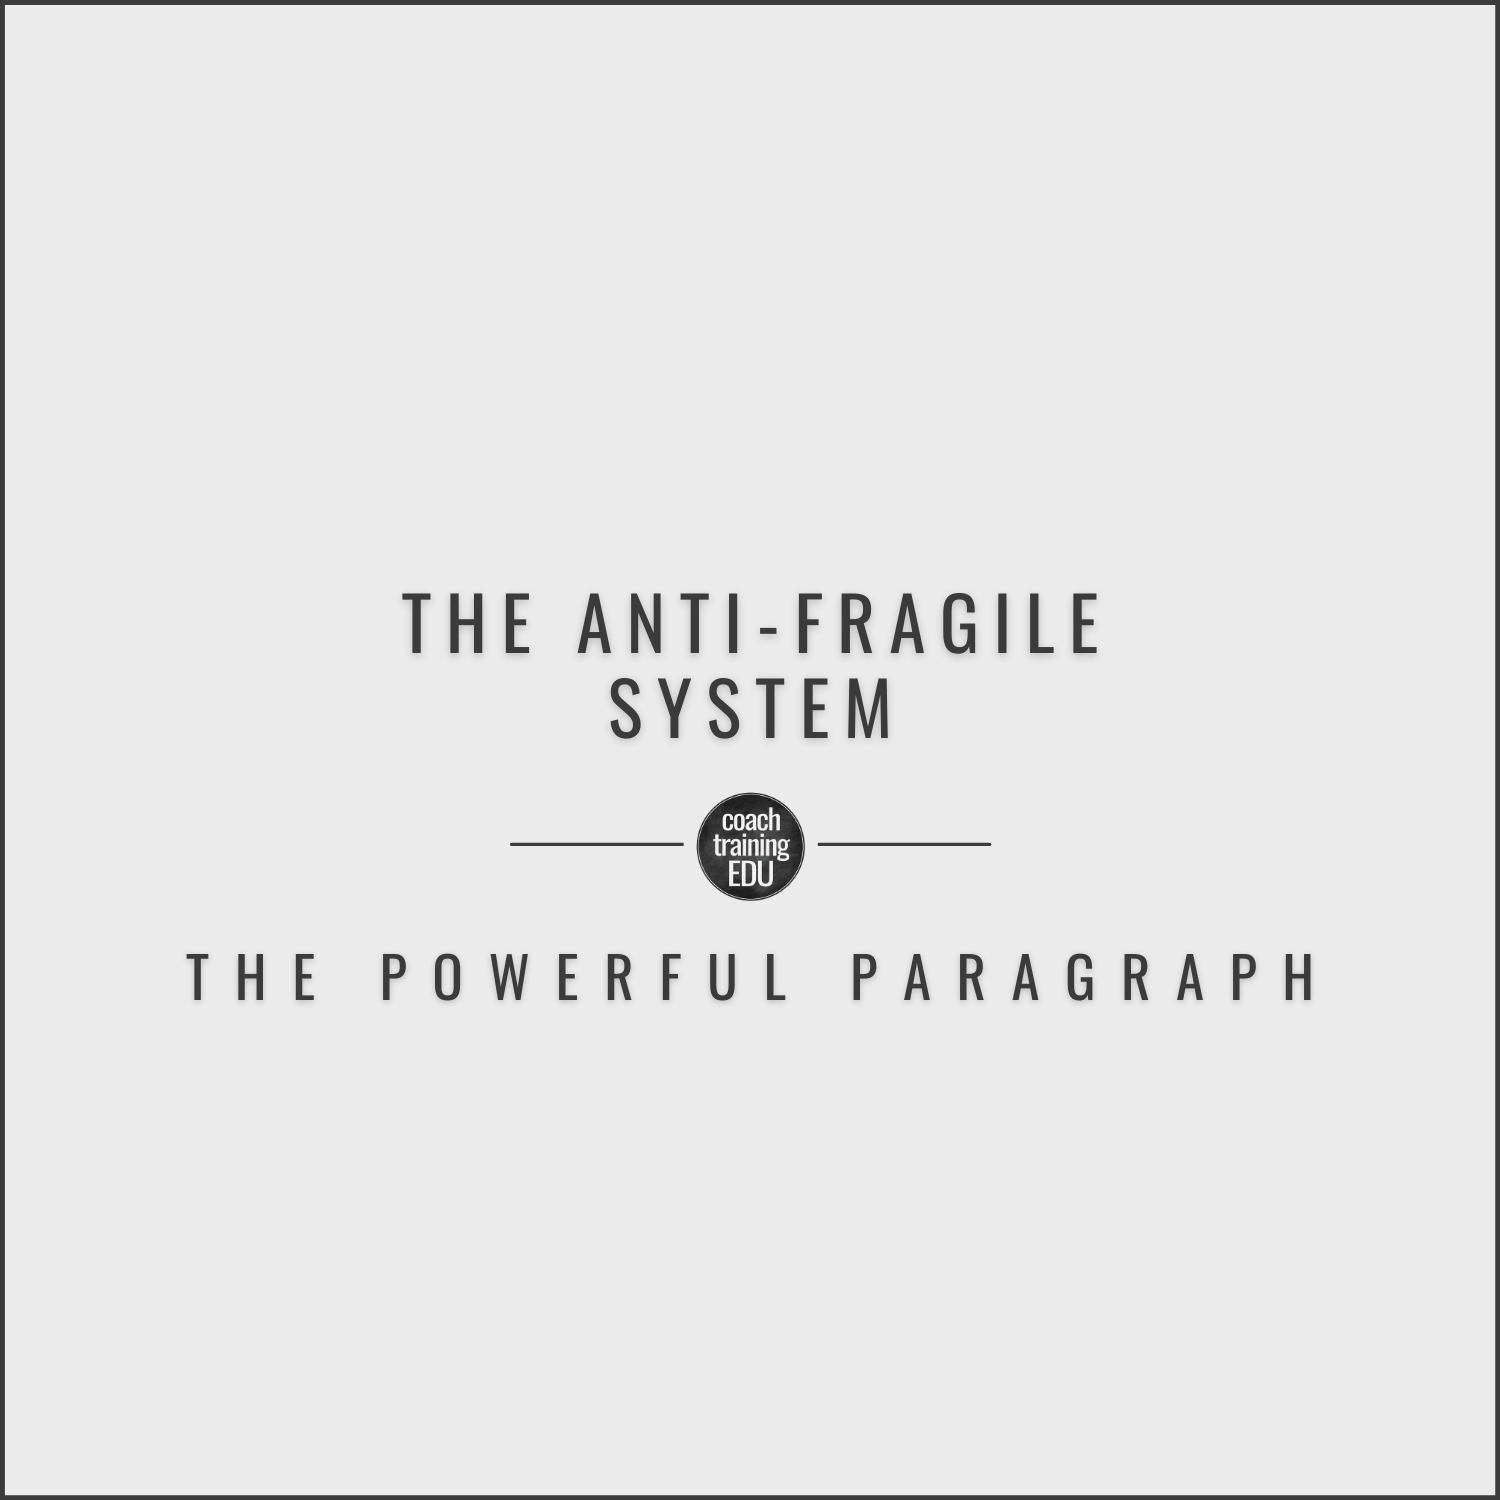 The Anti-Fragile System